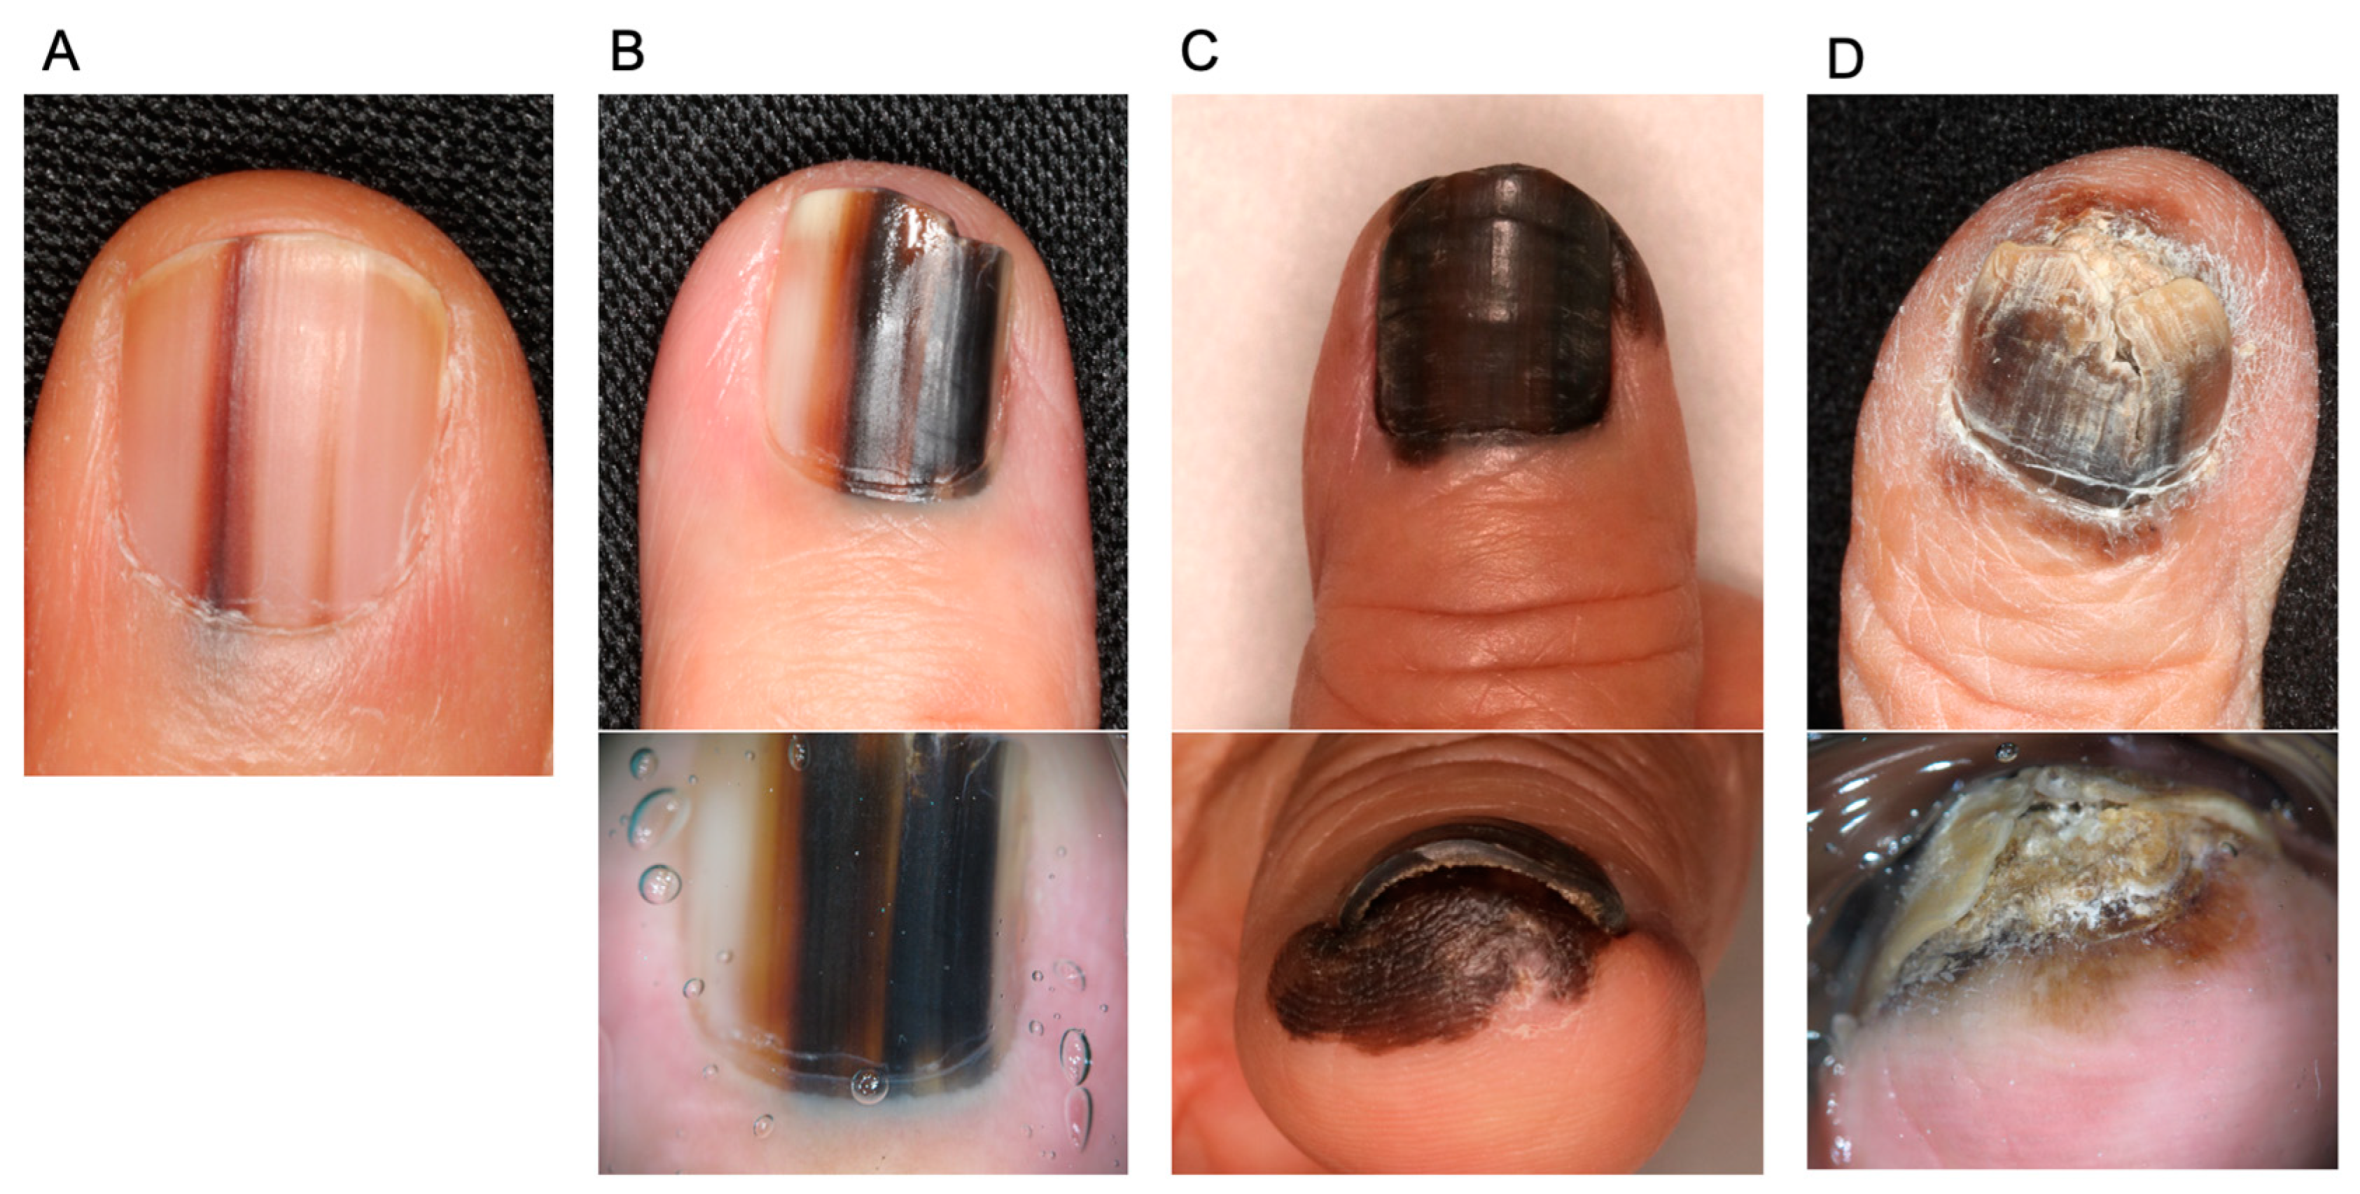 Fingernail analysis for early detection and diagnosis of diseases using  machine learning techniques